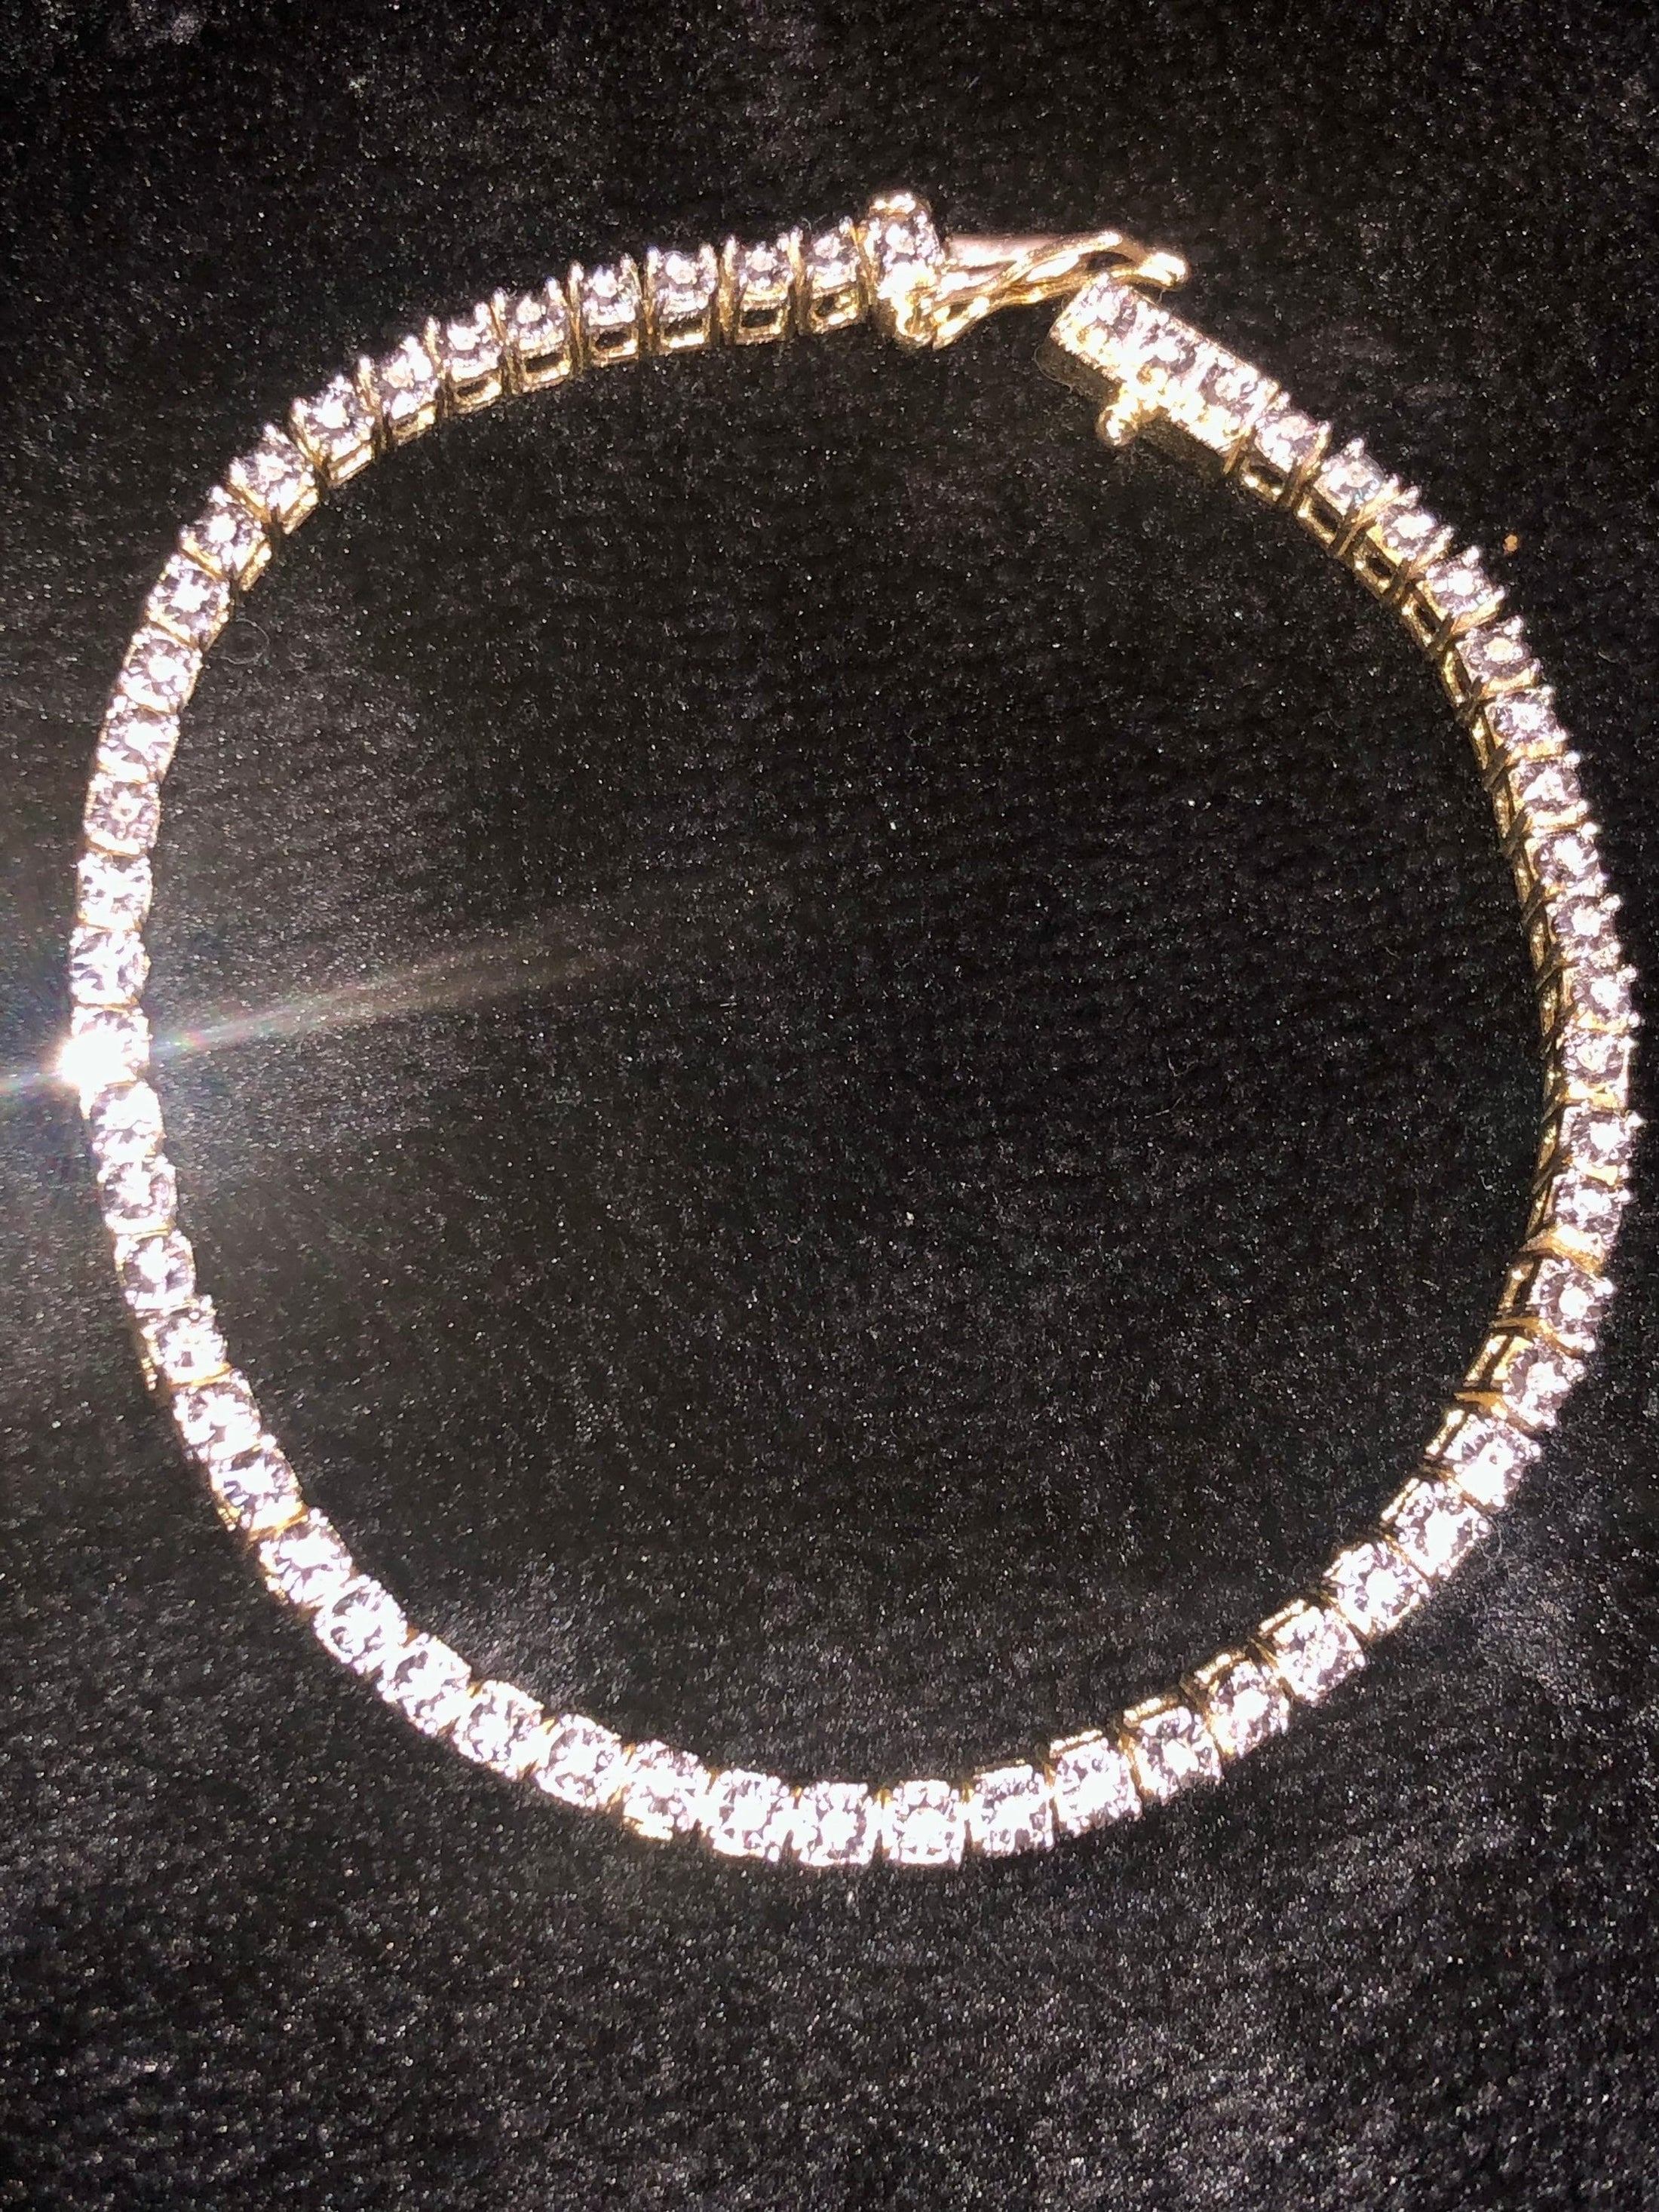 Real Diamond Tennis Bracelet, Gifts for her, Gifts for him, Genuine diamonds, 14k Gold Vermeil, Black Friday Sale, Christmas Gift, Free Ship